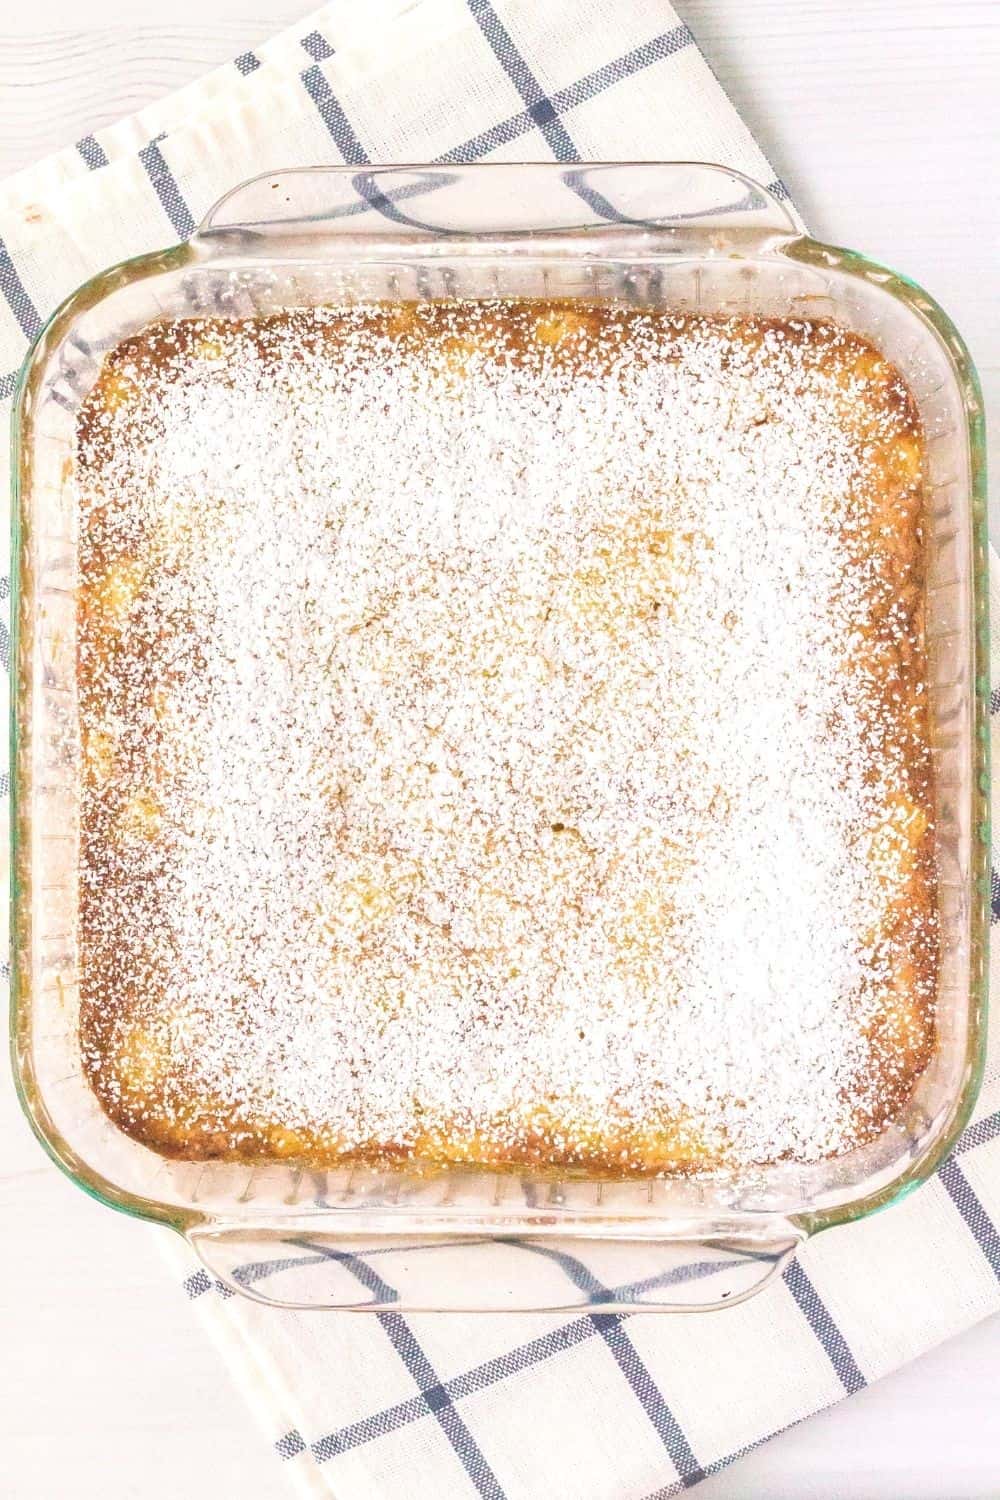 pineapple cake freshly baked, still in the pan and dusted with powdered sugar